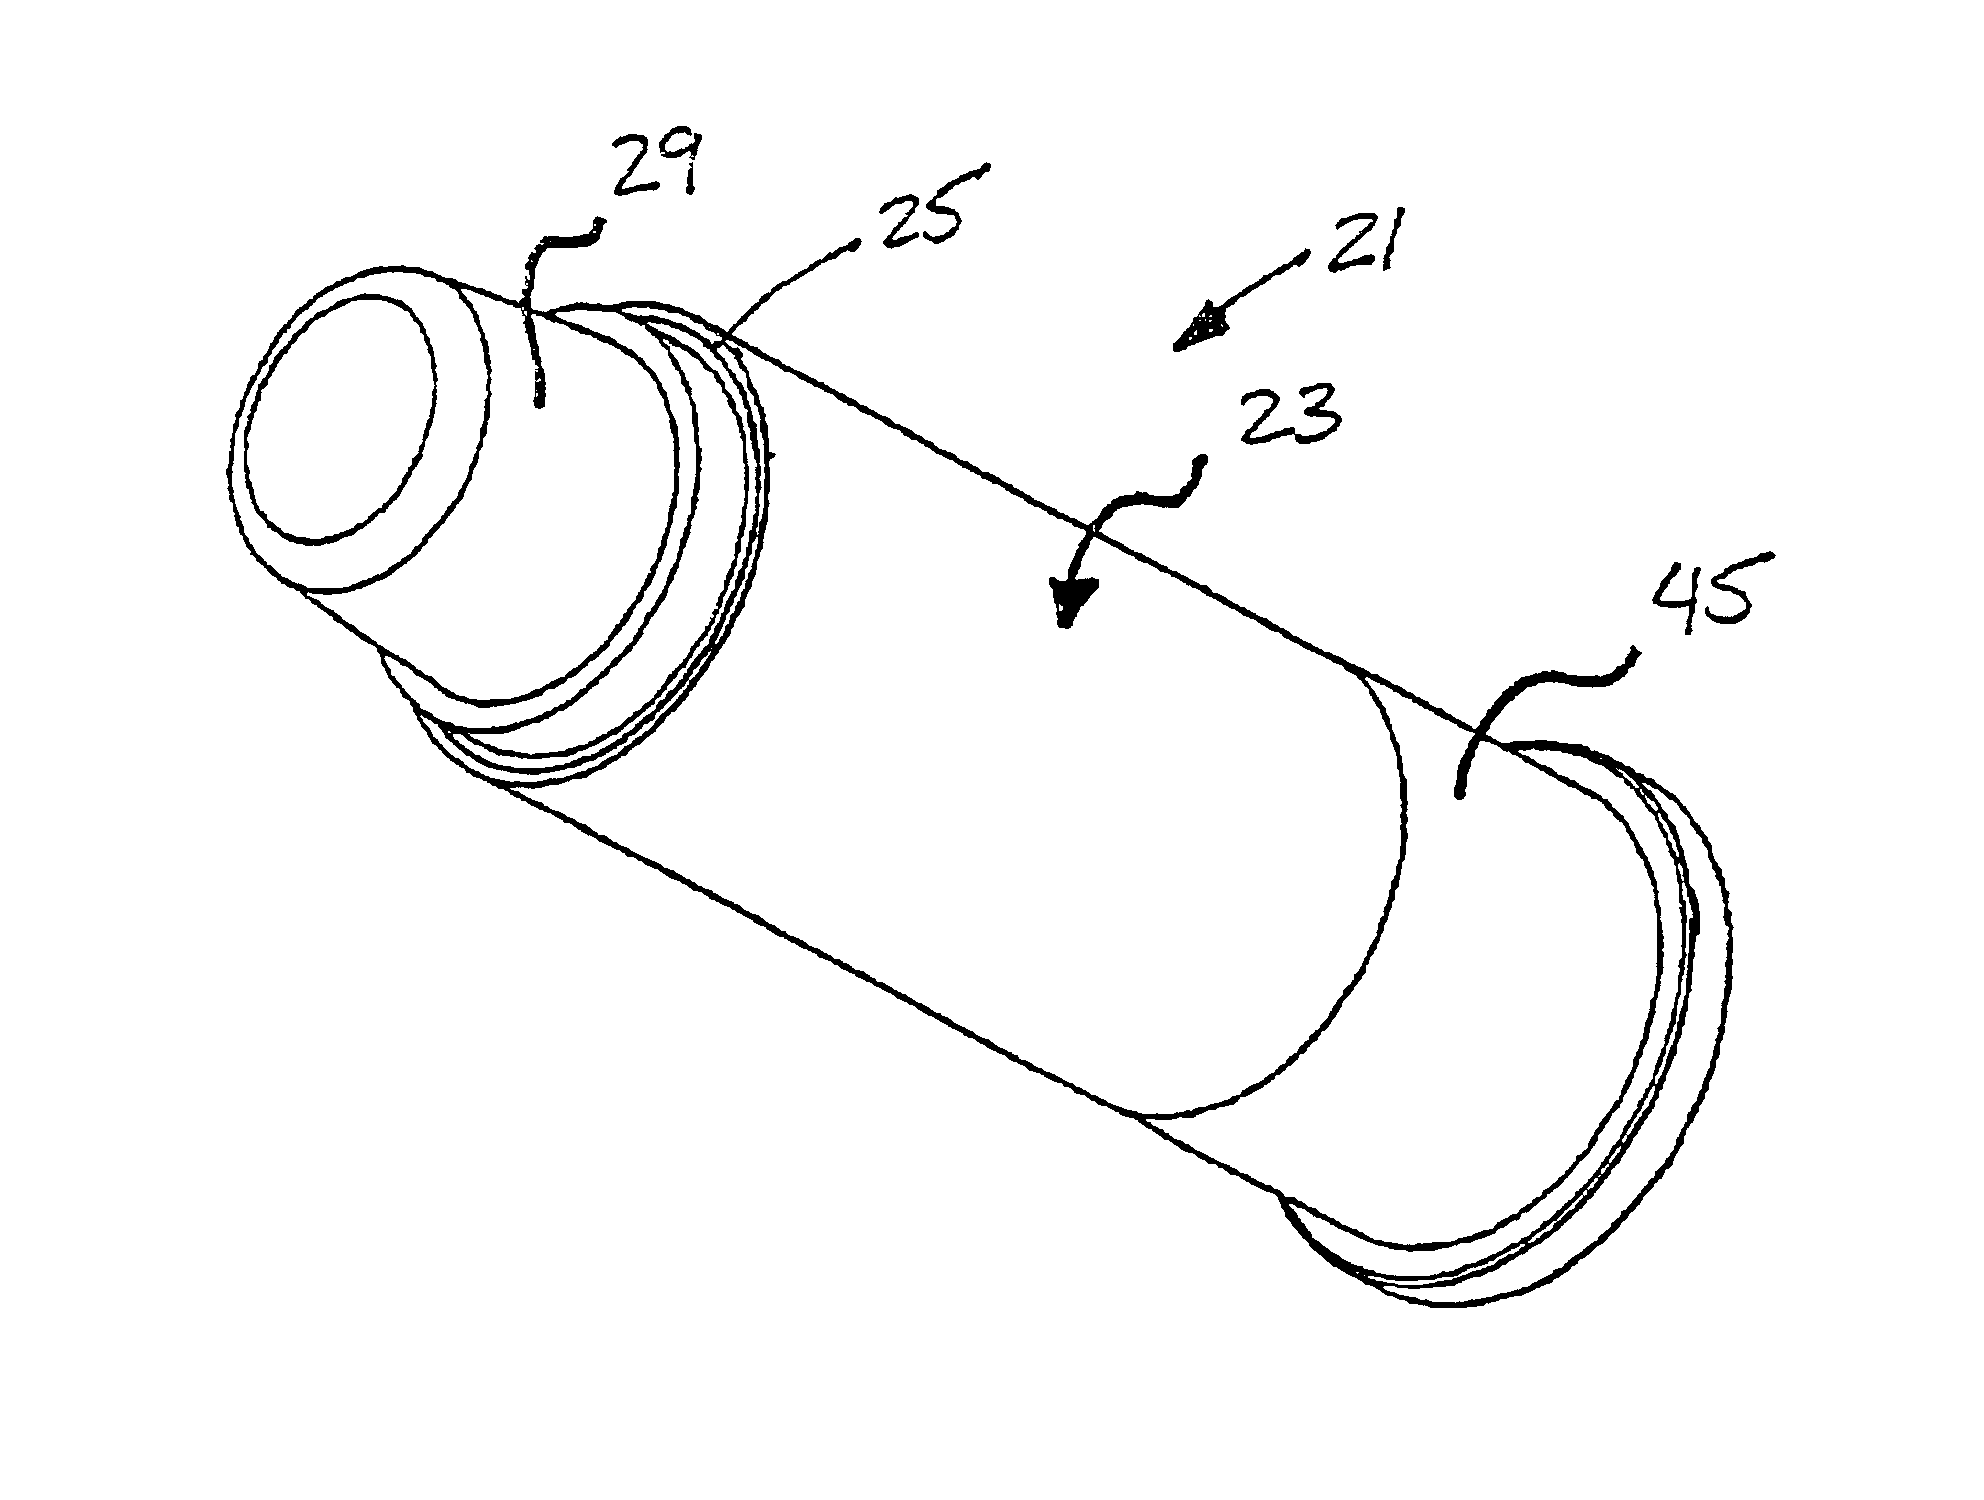 Ammunition articles with plastic components and method of making ammunition articles with plastic components